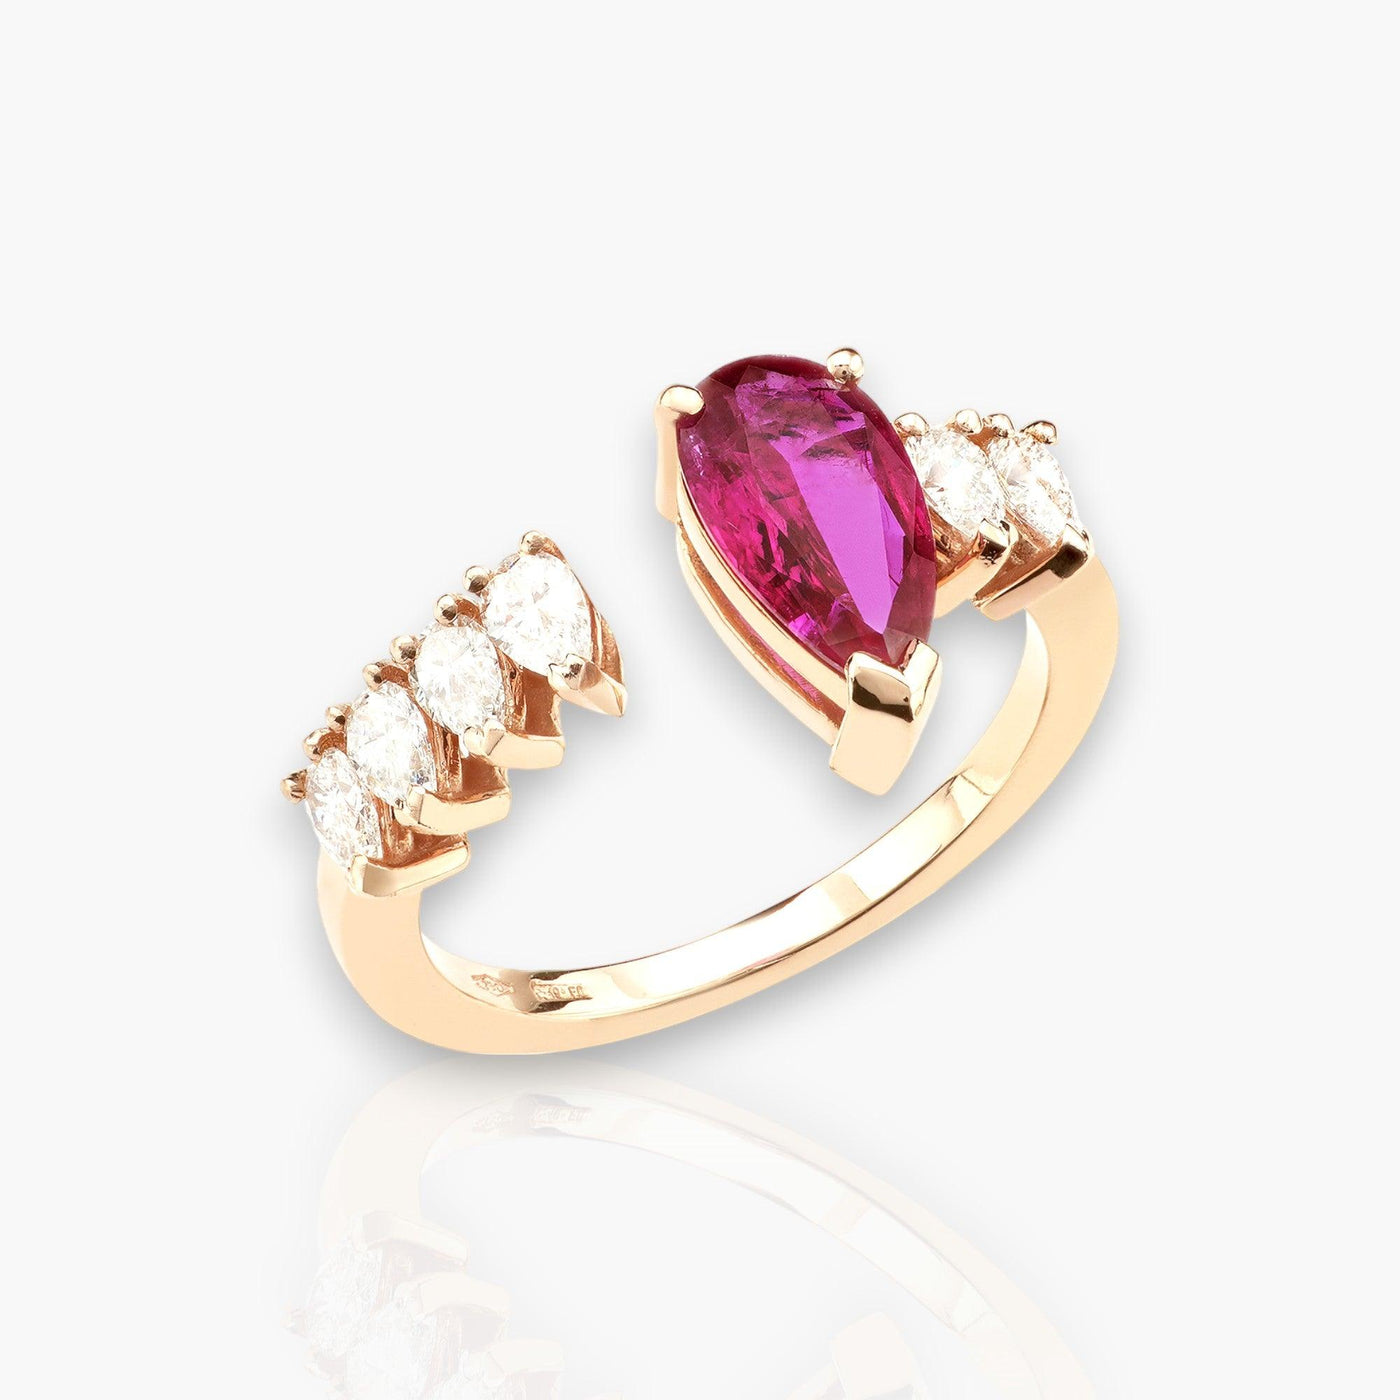 Drop Ring, Rose Gold, Diamonds And Ruby - Moregola Fine Jewelry